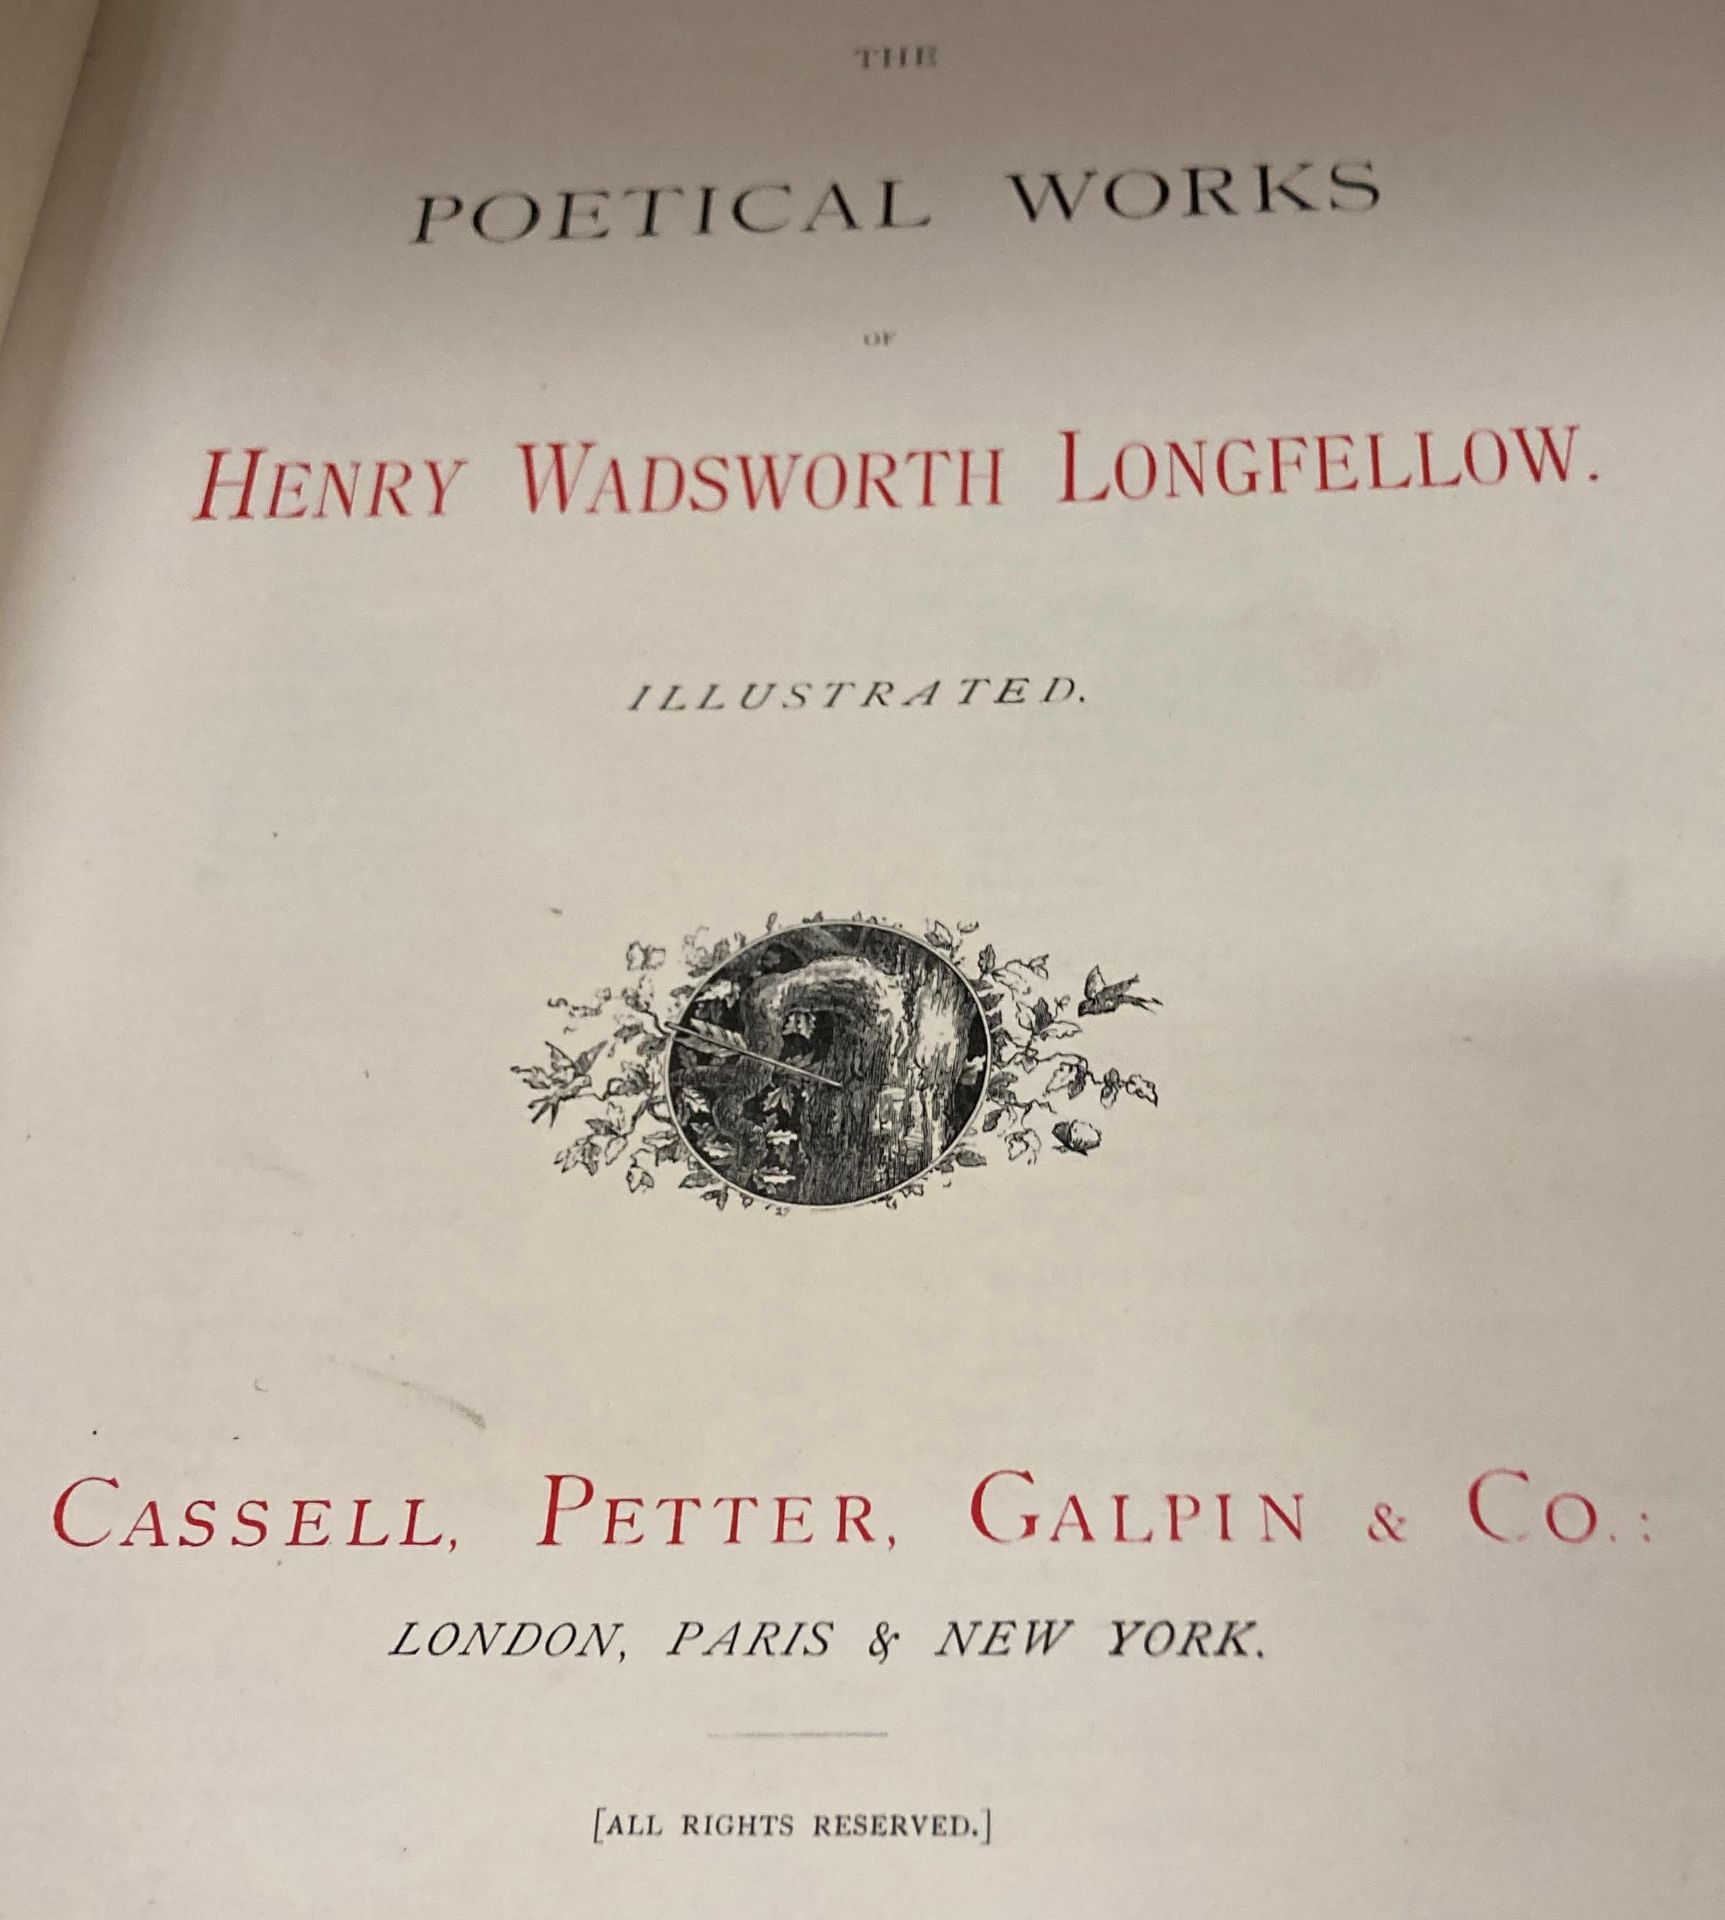 Two books 'The Poetical Works of Henry Wadsworth Longfellow' published by Cassell, Pelter, - Image 3 of 8